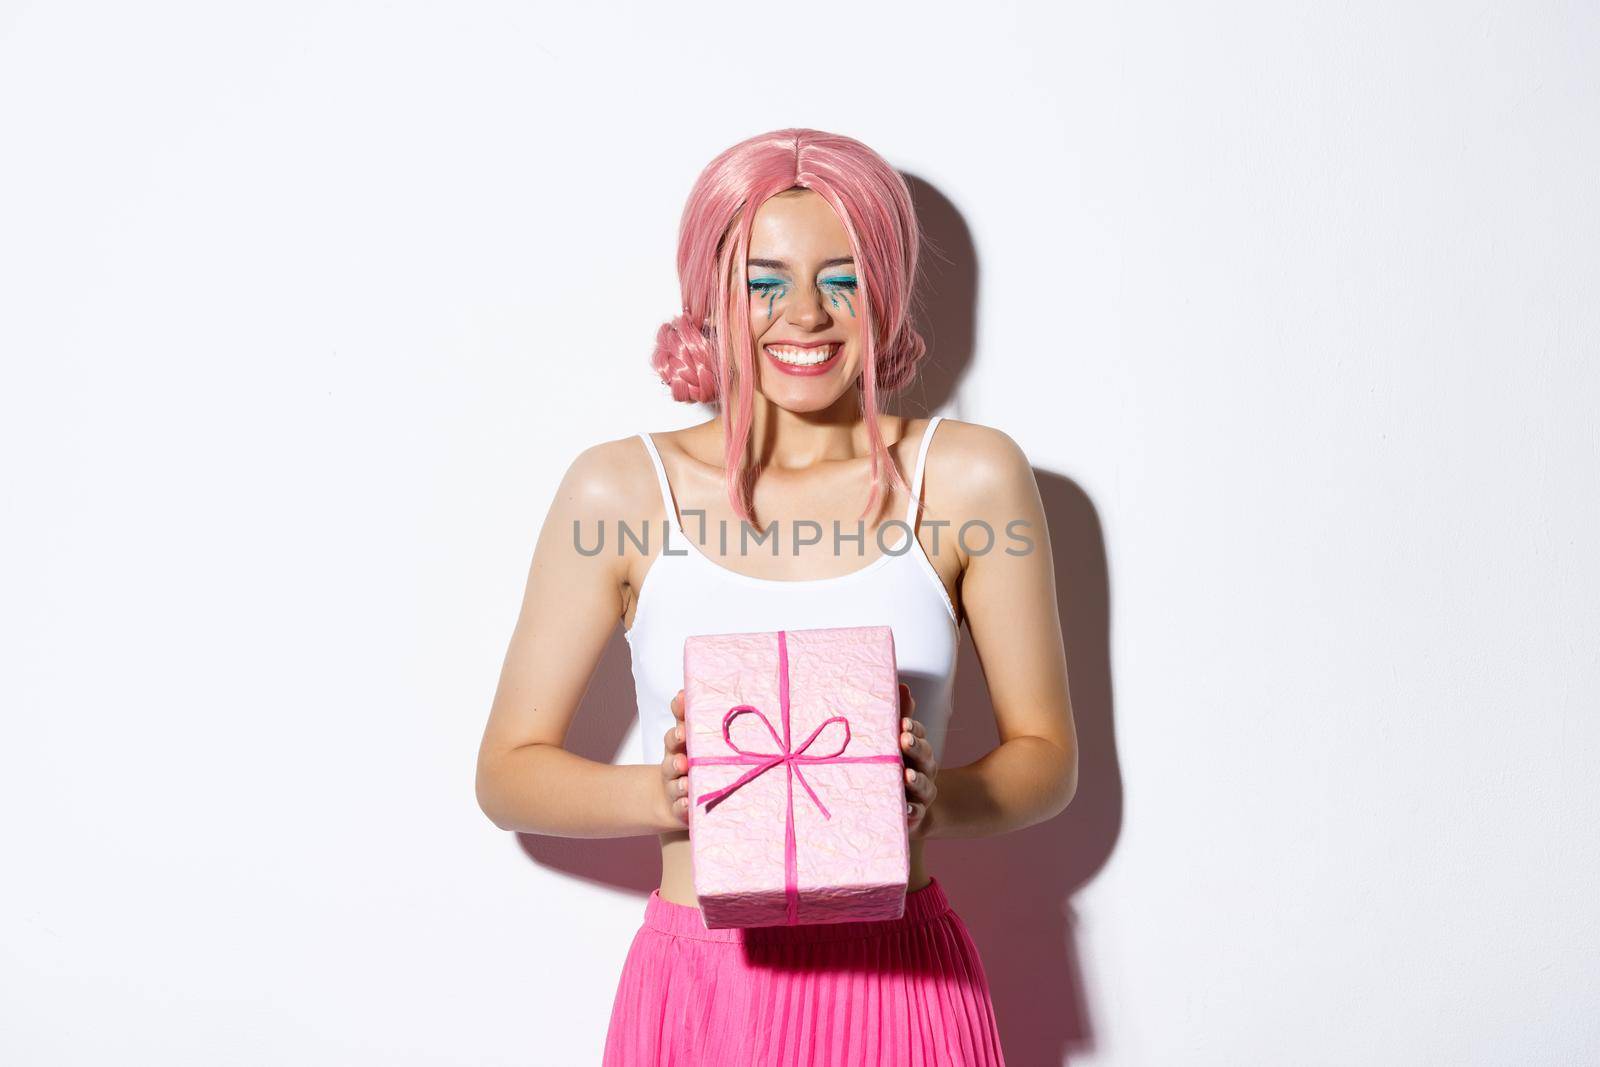 Portrait of happy beautiful b-day girl looking excited, receiving birthday gift and smiling joyfully, standing in pink wig and party outfit over white background.